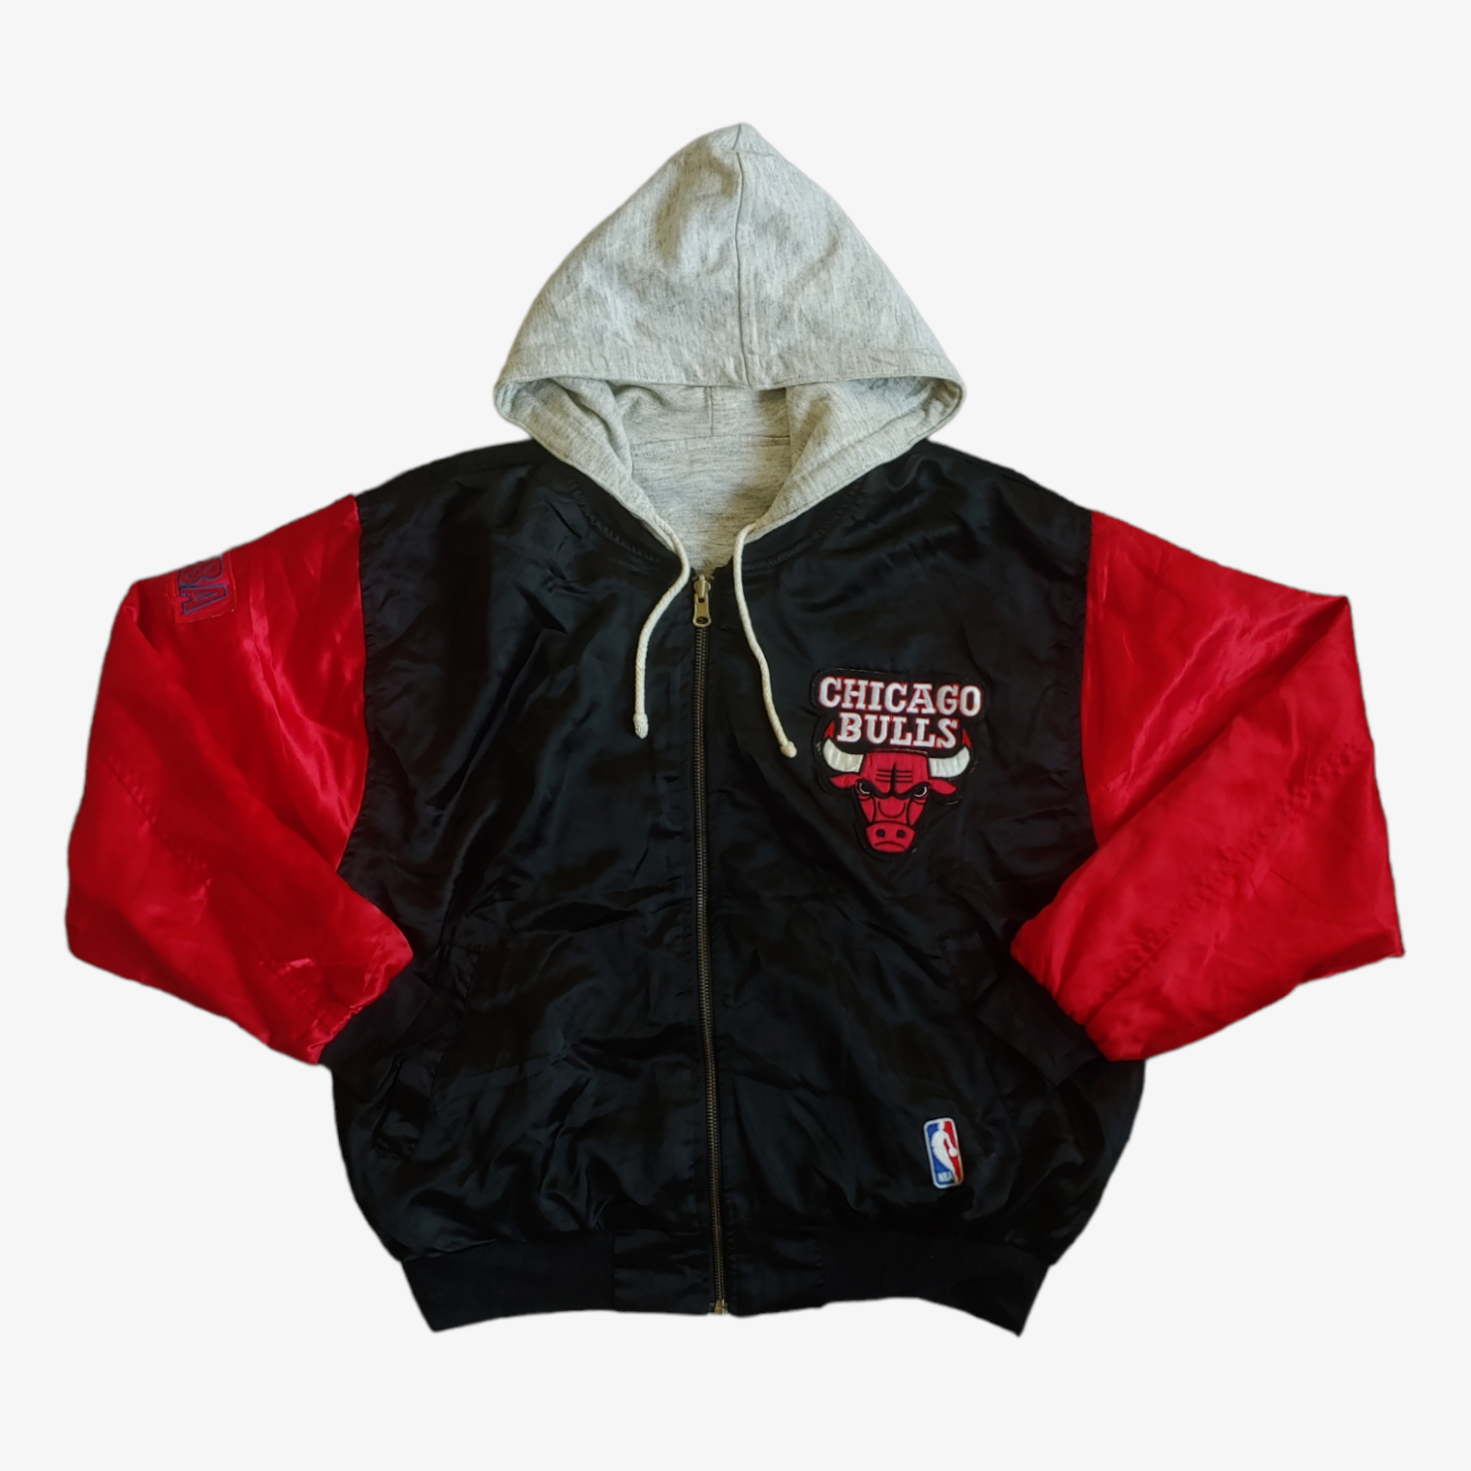 Vintage 90s NBA Chicago Bulls Jacket With Back Spell Out Logo - Casspios Dream